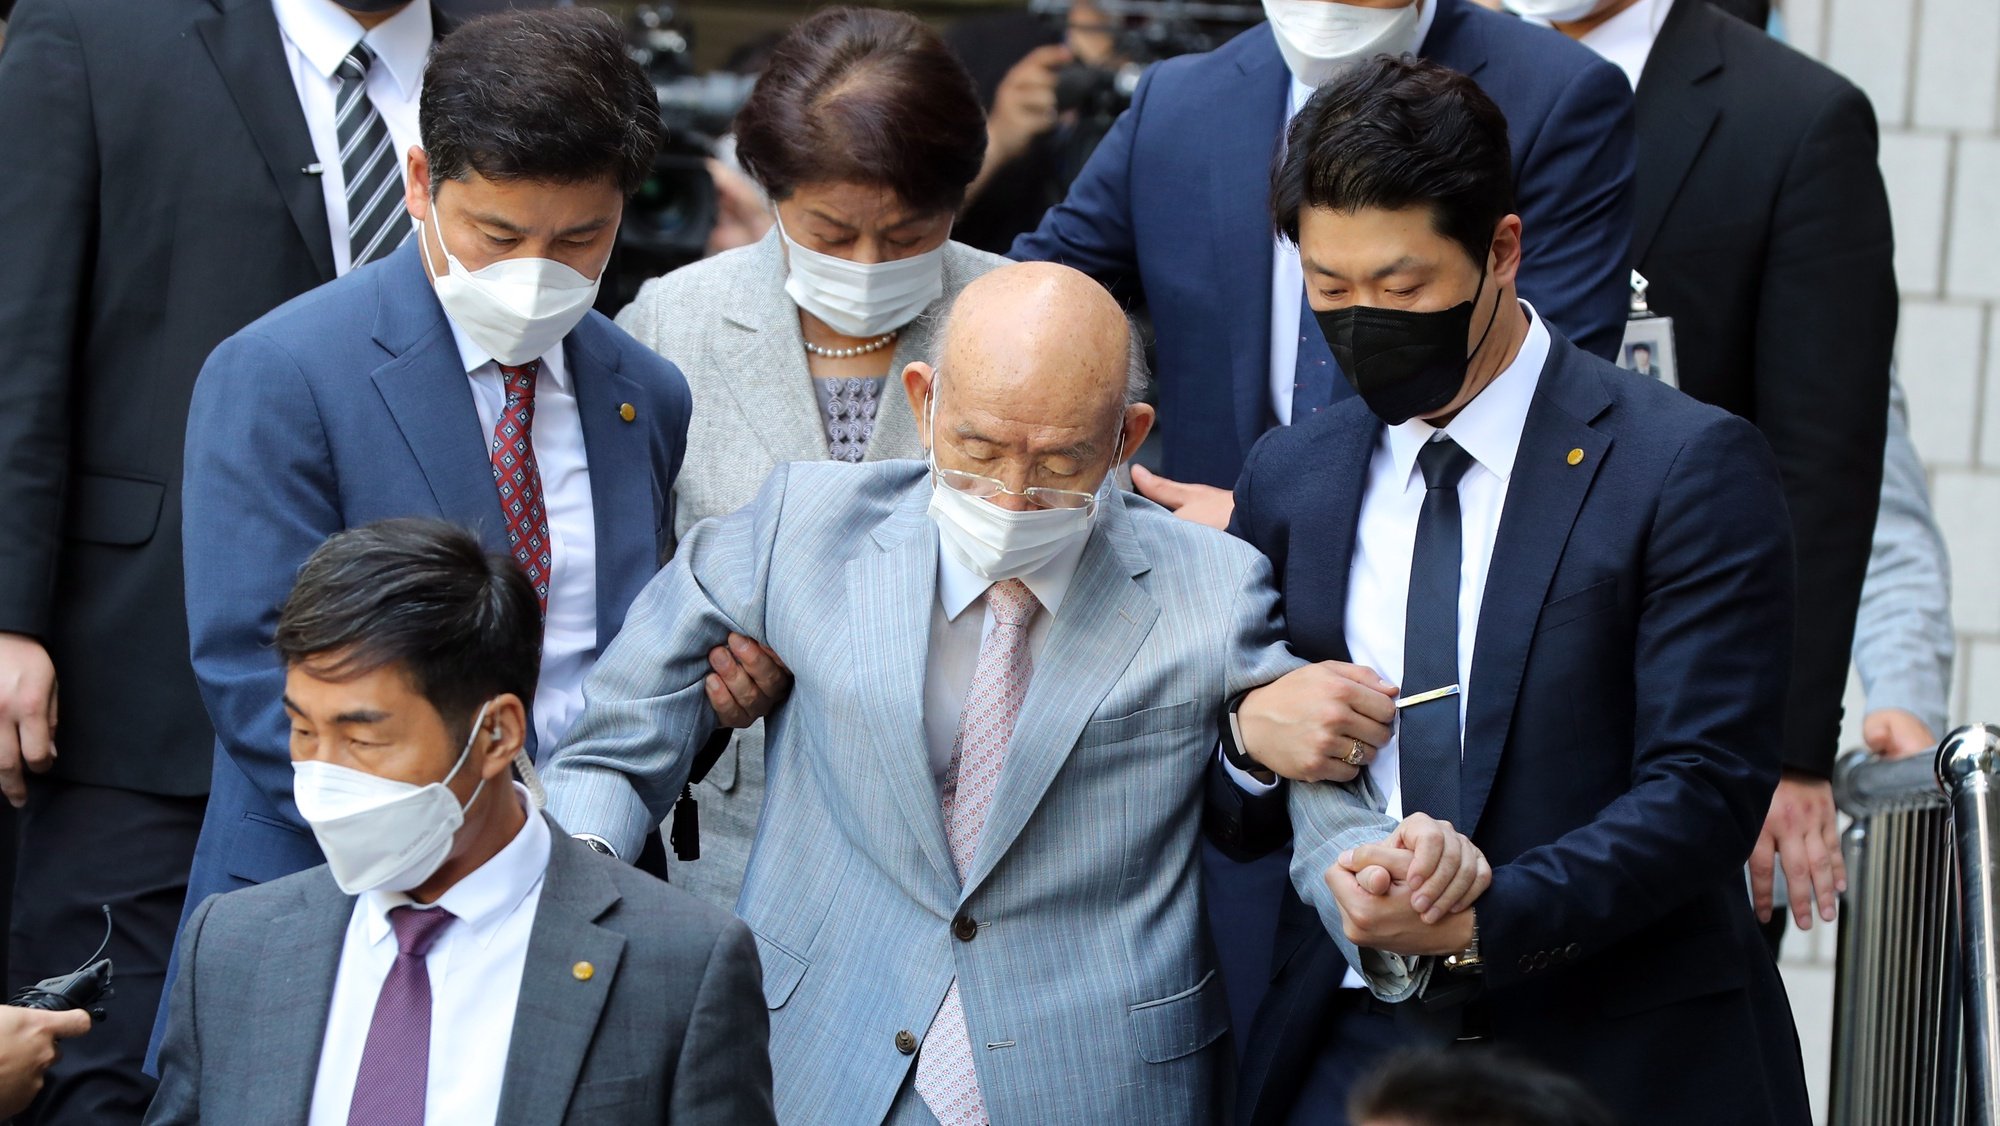 epa09598399 Former President Chun Doo-hwan (C), escorted by security guards, leaves a district court in the southwestern city of Gwangju, South Korea, 09 August 2021 (issued 23 November 2021), after attending an appellate trial on the charge of libel. Chun, a general-turned strongman who seized power through a 1979 military coup and ruthlessly quelled a pro-democracy civil uprising in the city the following year, died on 23 November 2021, aides said. He was 90.  EPA/YONHAP SOUTH KOREA OUT